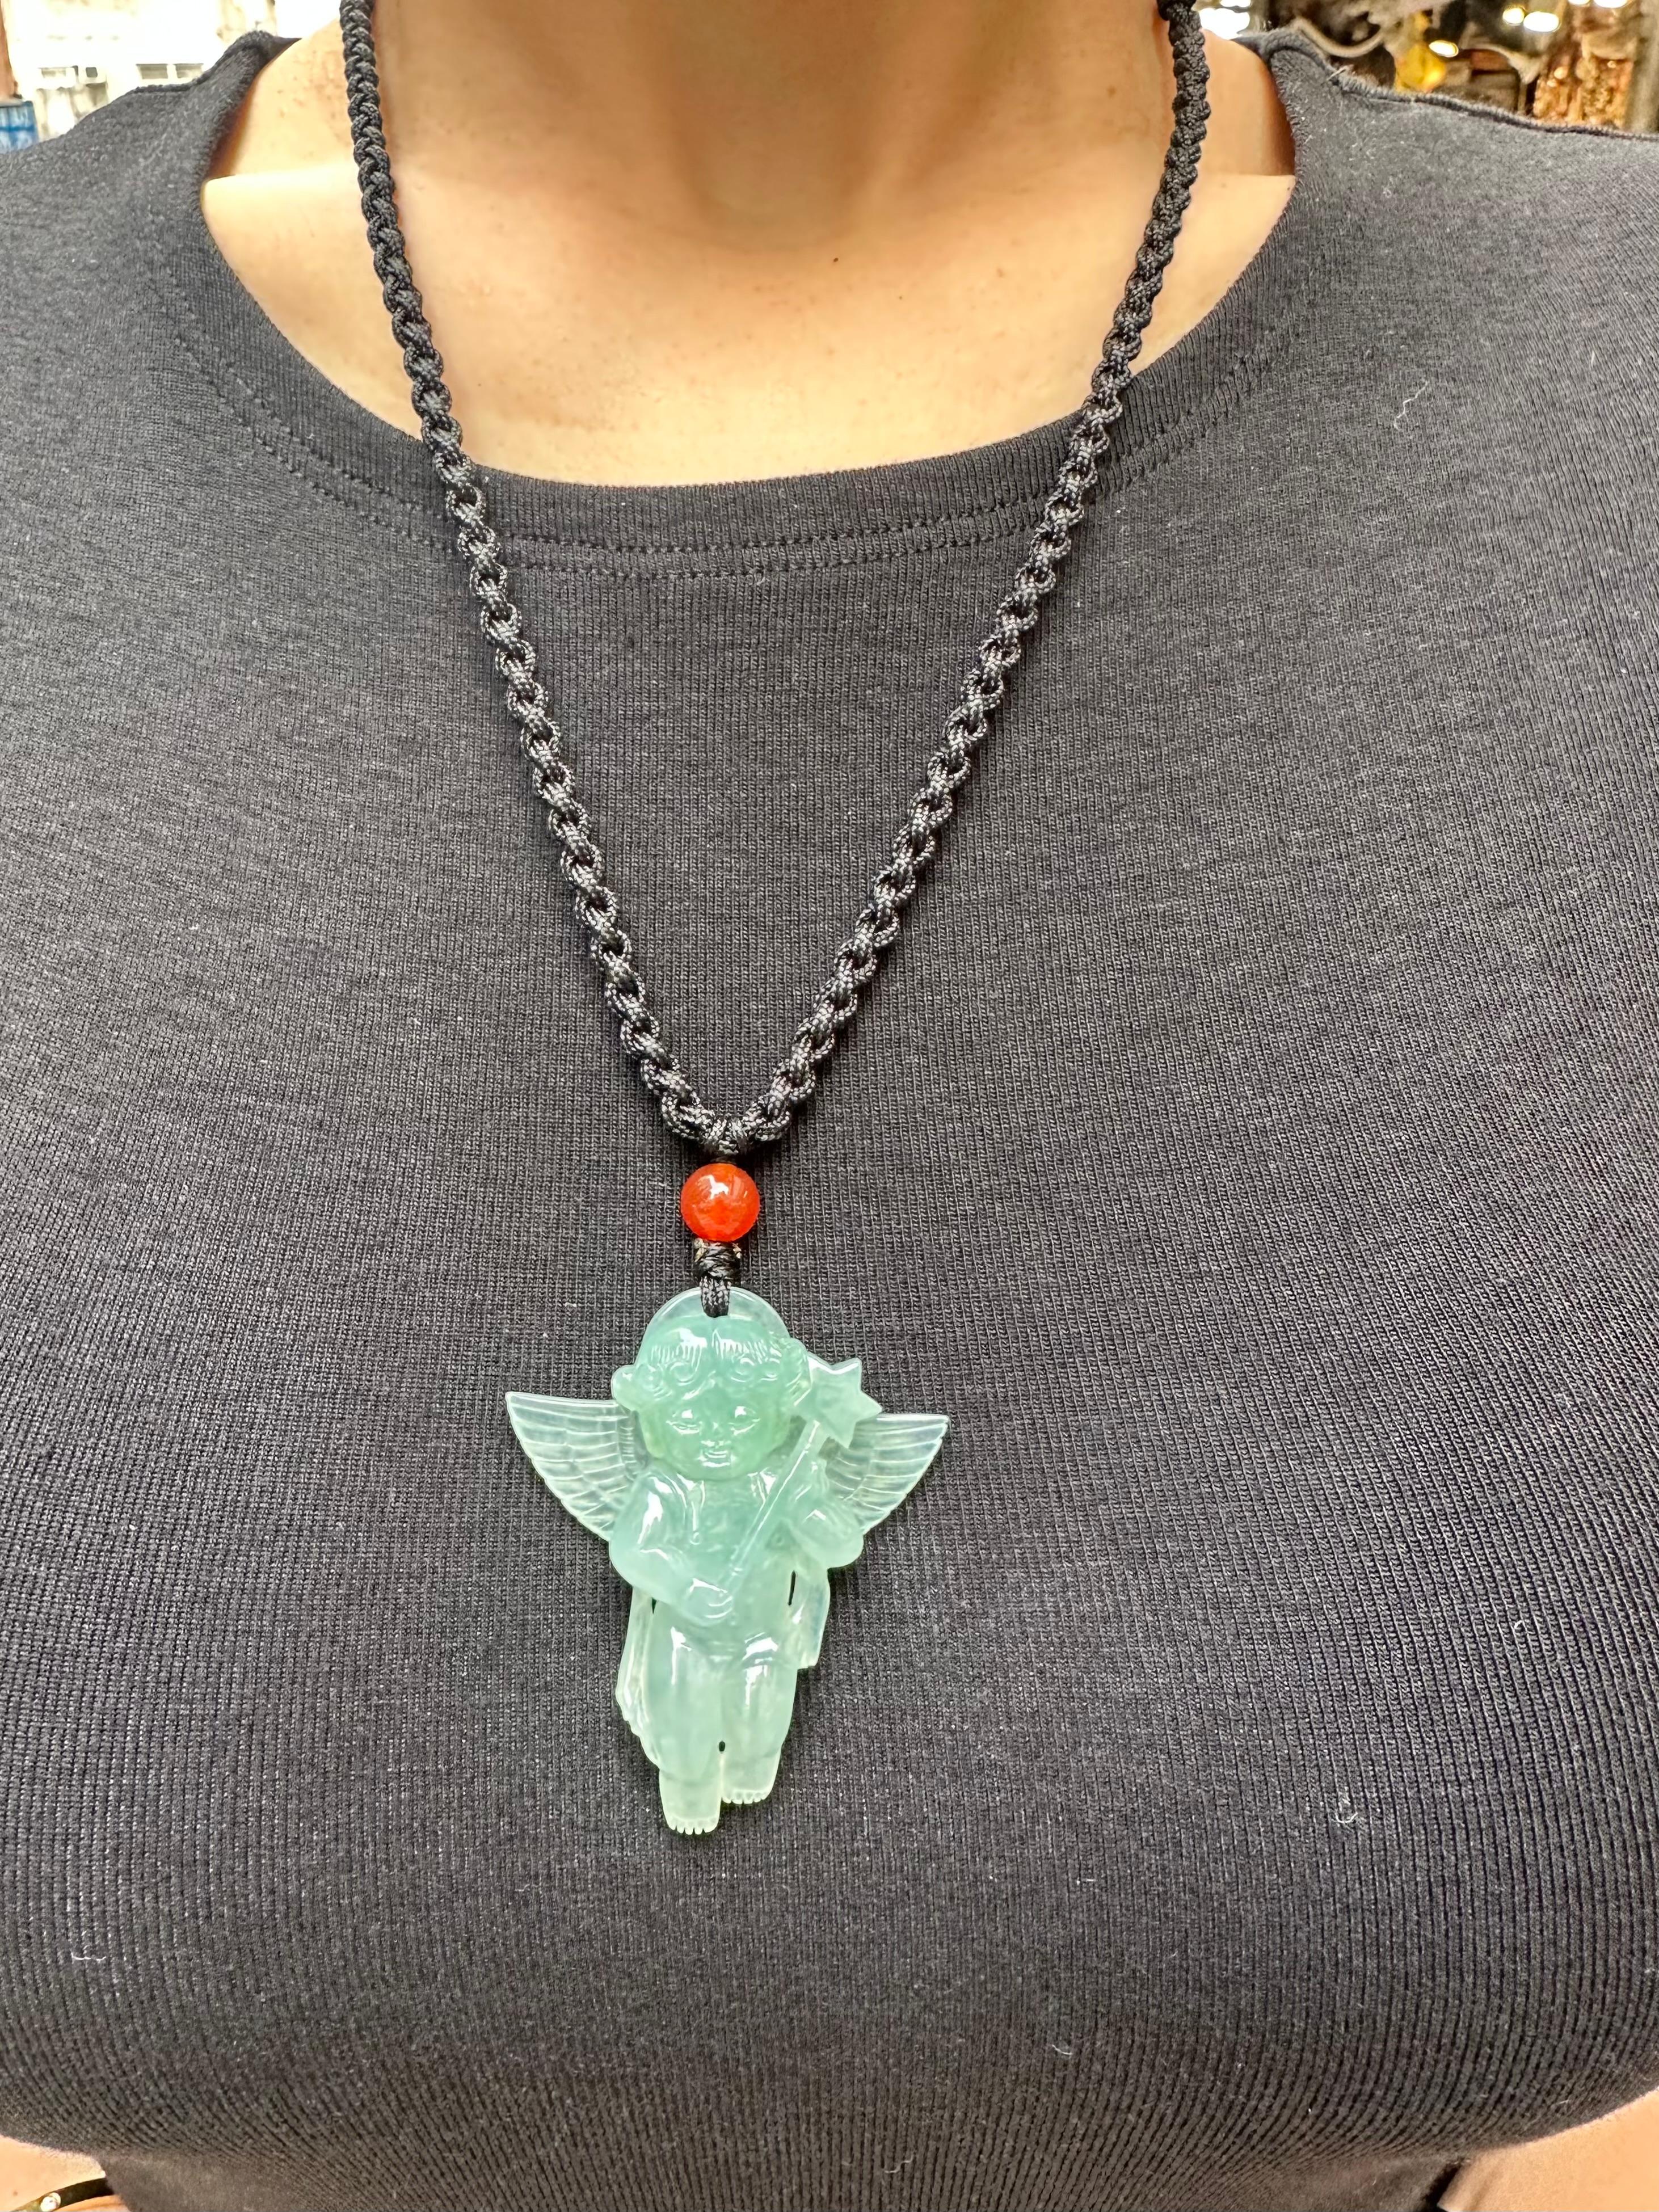 Please check out the HD video. This certified natural jadeite jade is over 100 carats, un-enhanced and untreated. The angel of protection jade pendant is exceptionally carved. The jade pendant is matched simply with a red agate bead. The light green